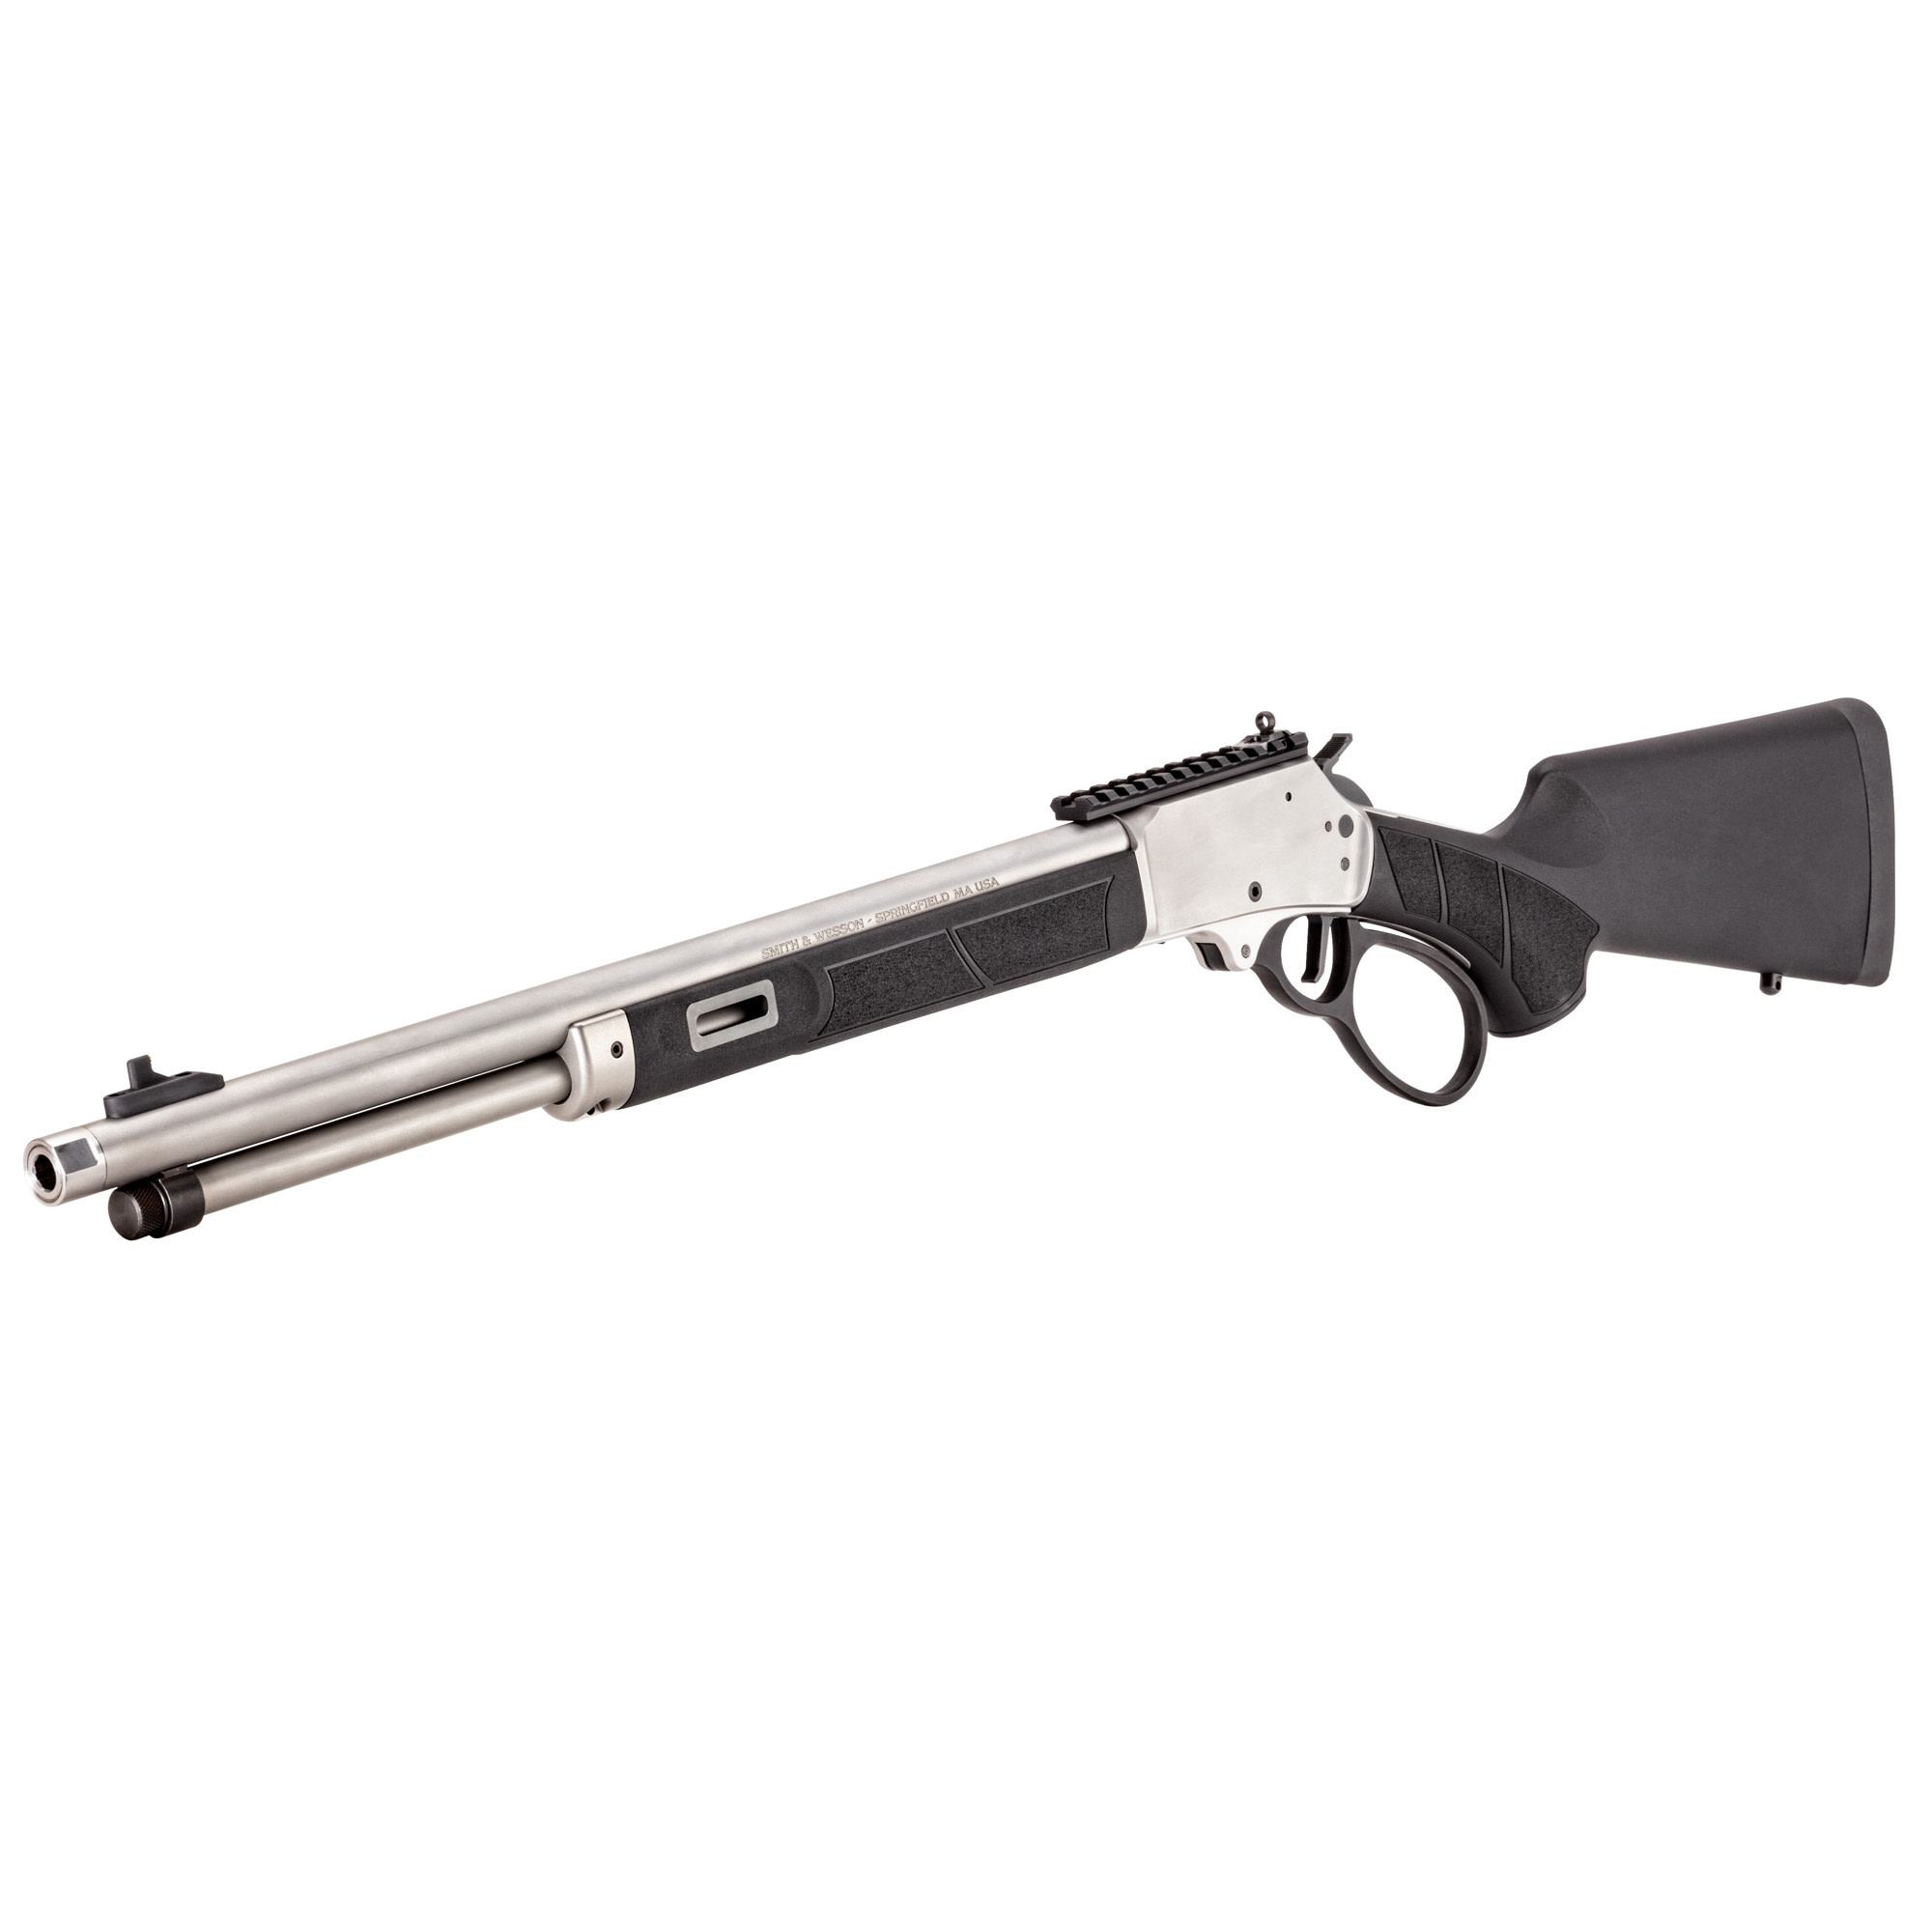 Smith & Wesson, 1854 44MAG 19.25" SS/BLK 9RND Rifle